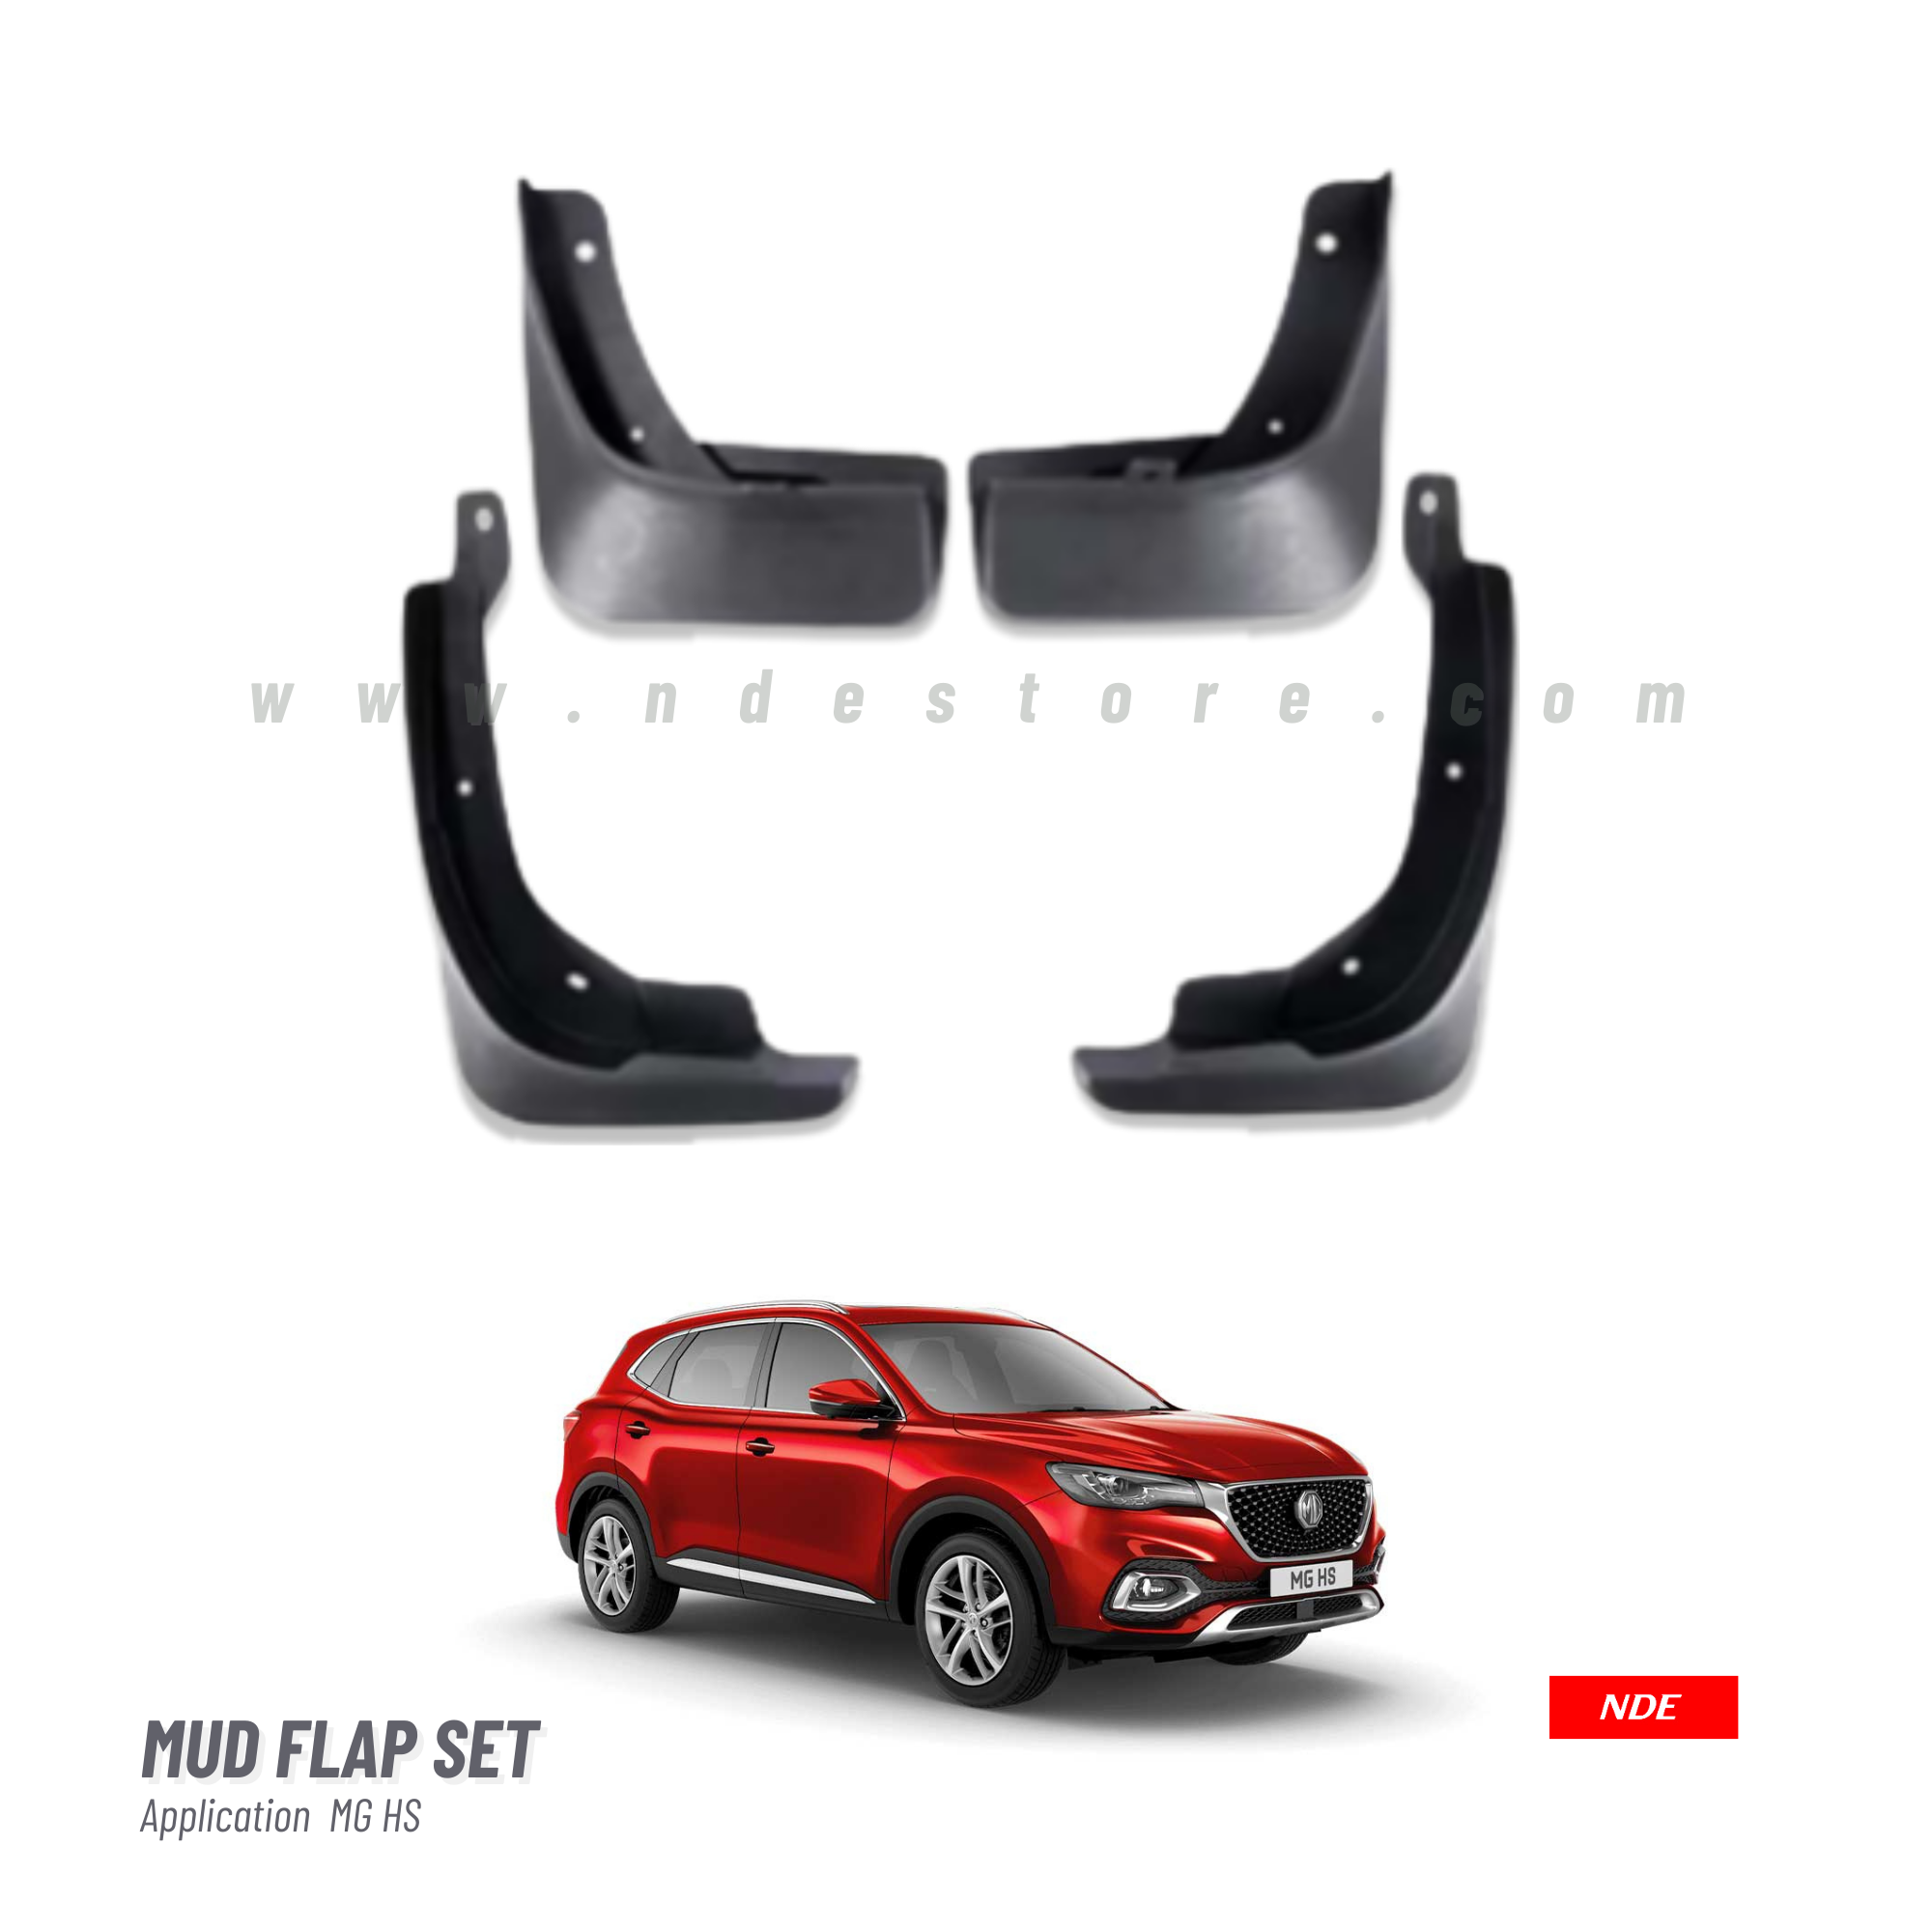 MUD FLAP SET FOR MG HS